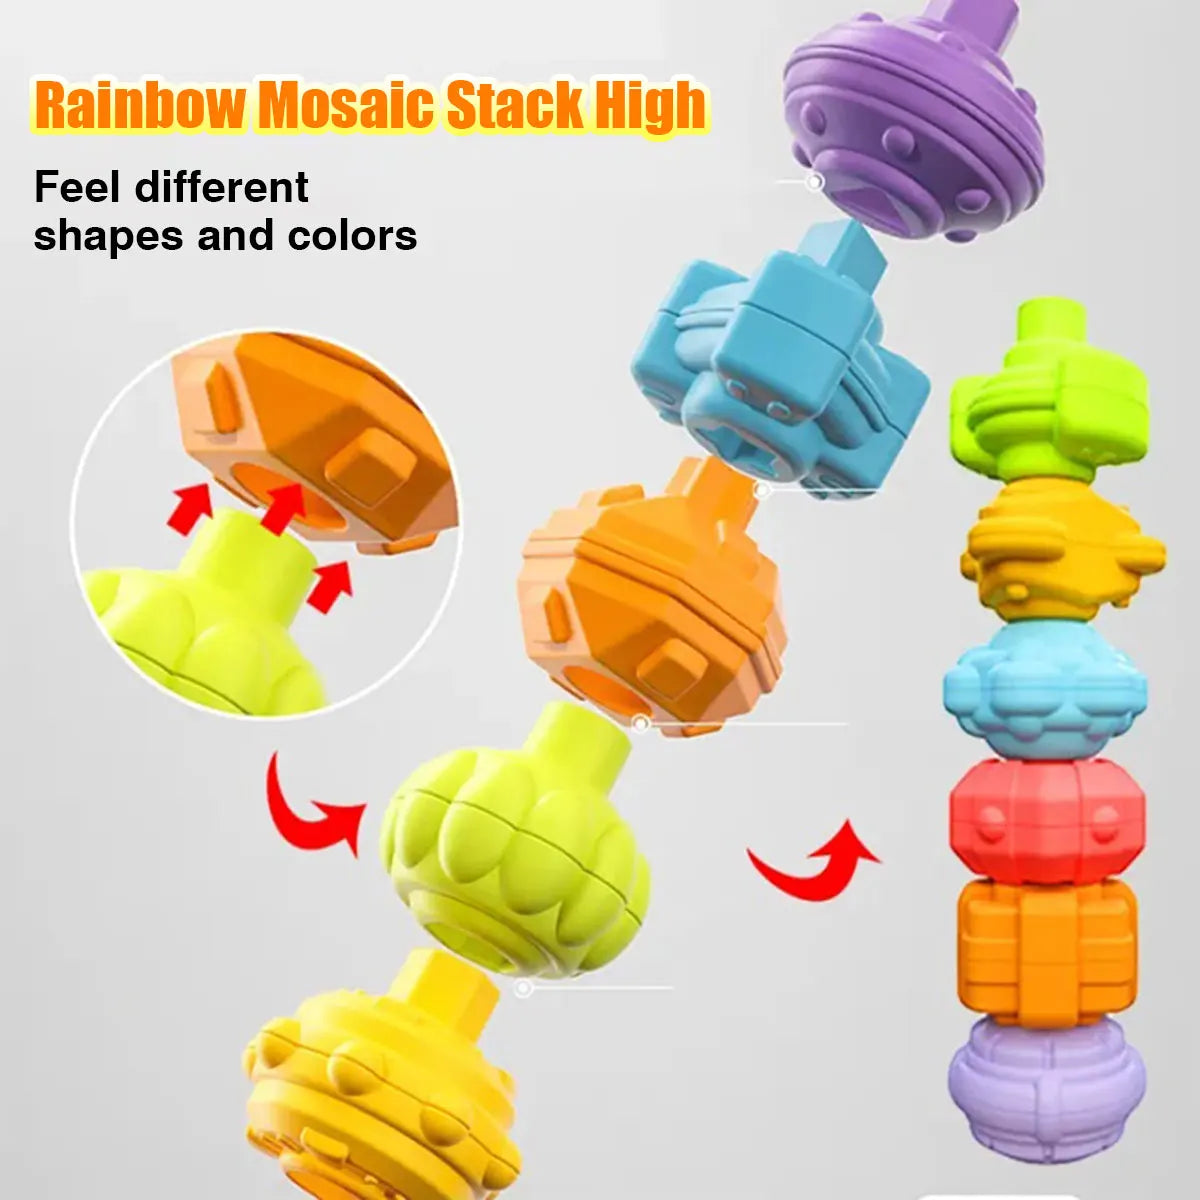 Montessori Baby Toys 0-12 Months Sensory Development Learning Educational Toys Colorful Blocks Sorting Game For Babies Infant